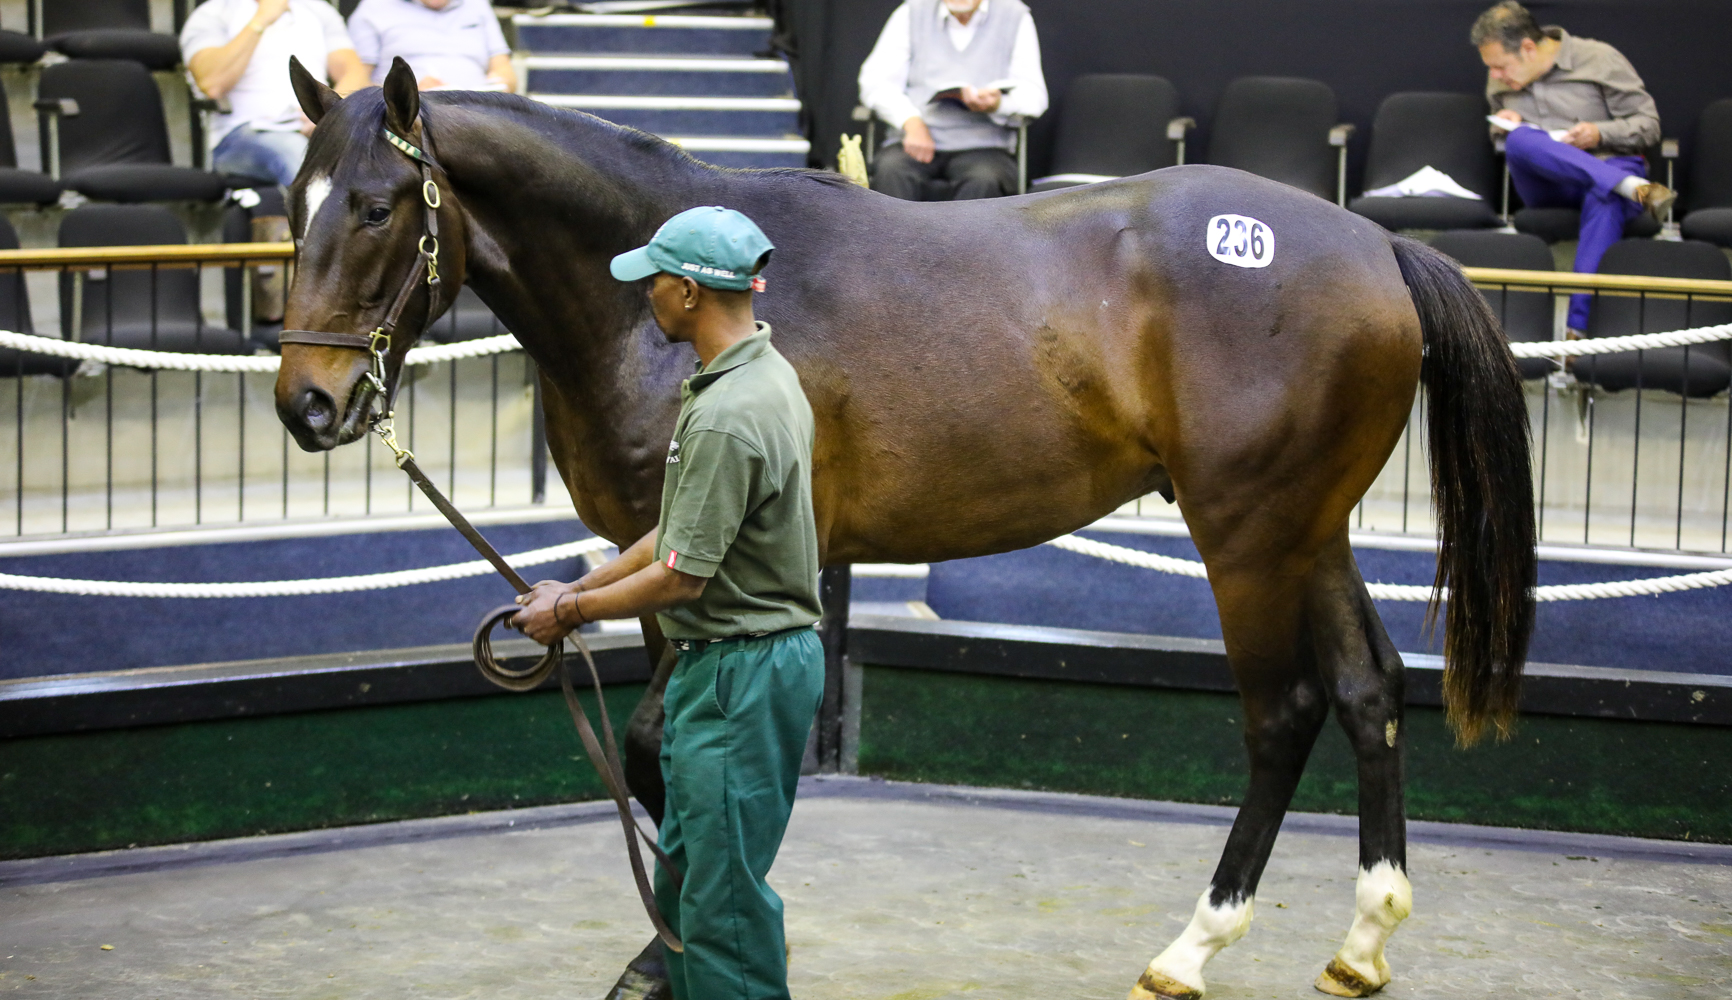 Spring Valley's outstanding Var colt sold for R300 000 to the stable of Adam and Mike Azzie. Image: Candiese Marnewick